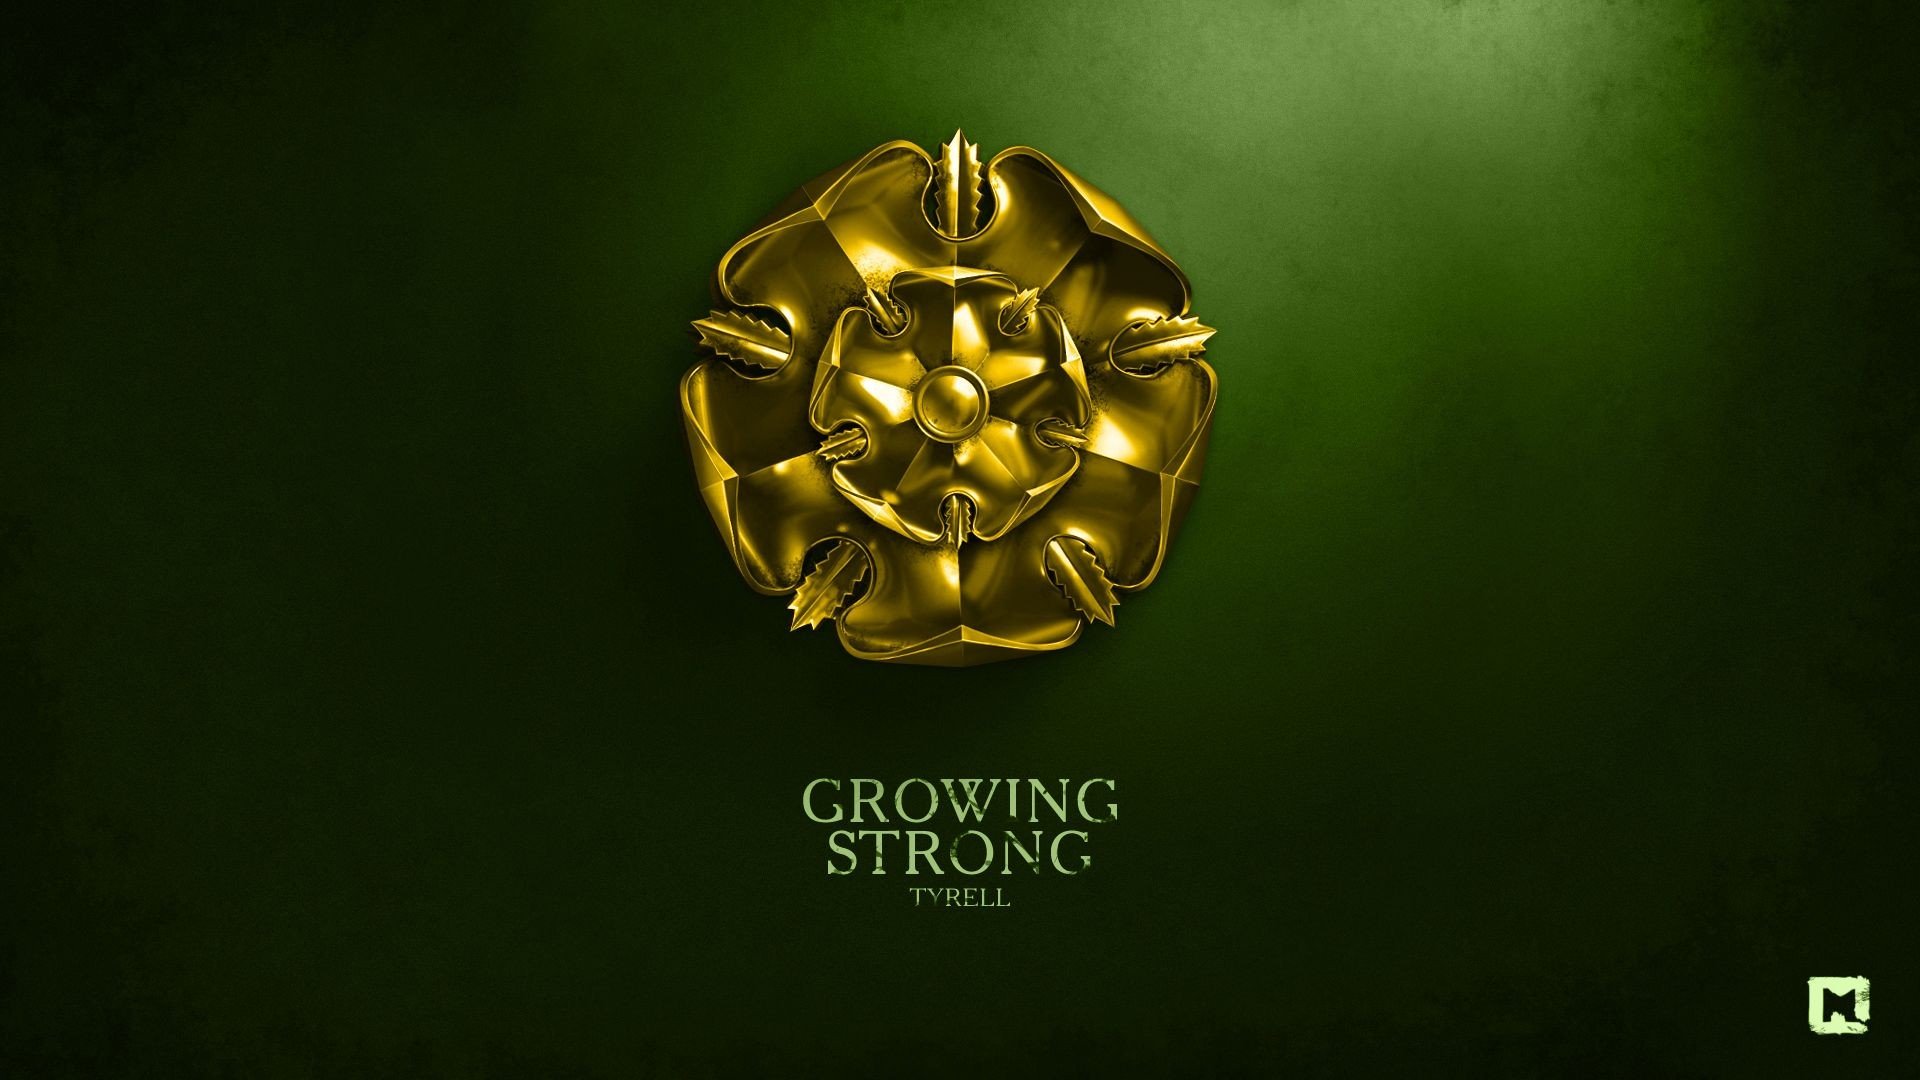 Multicolor Game Of Thrones Tv Series House Tyrell Growing Strong